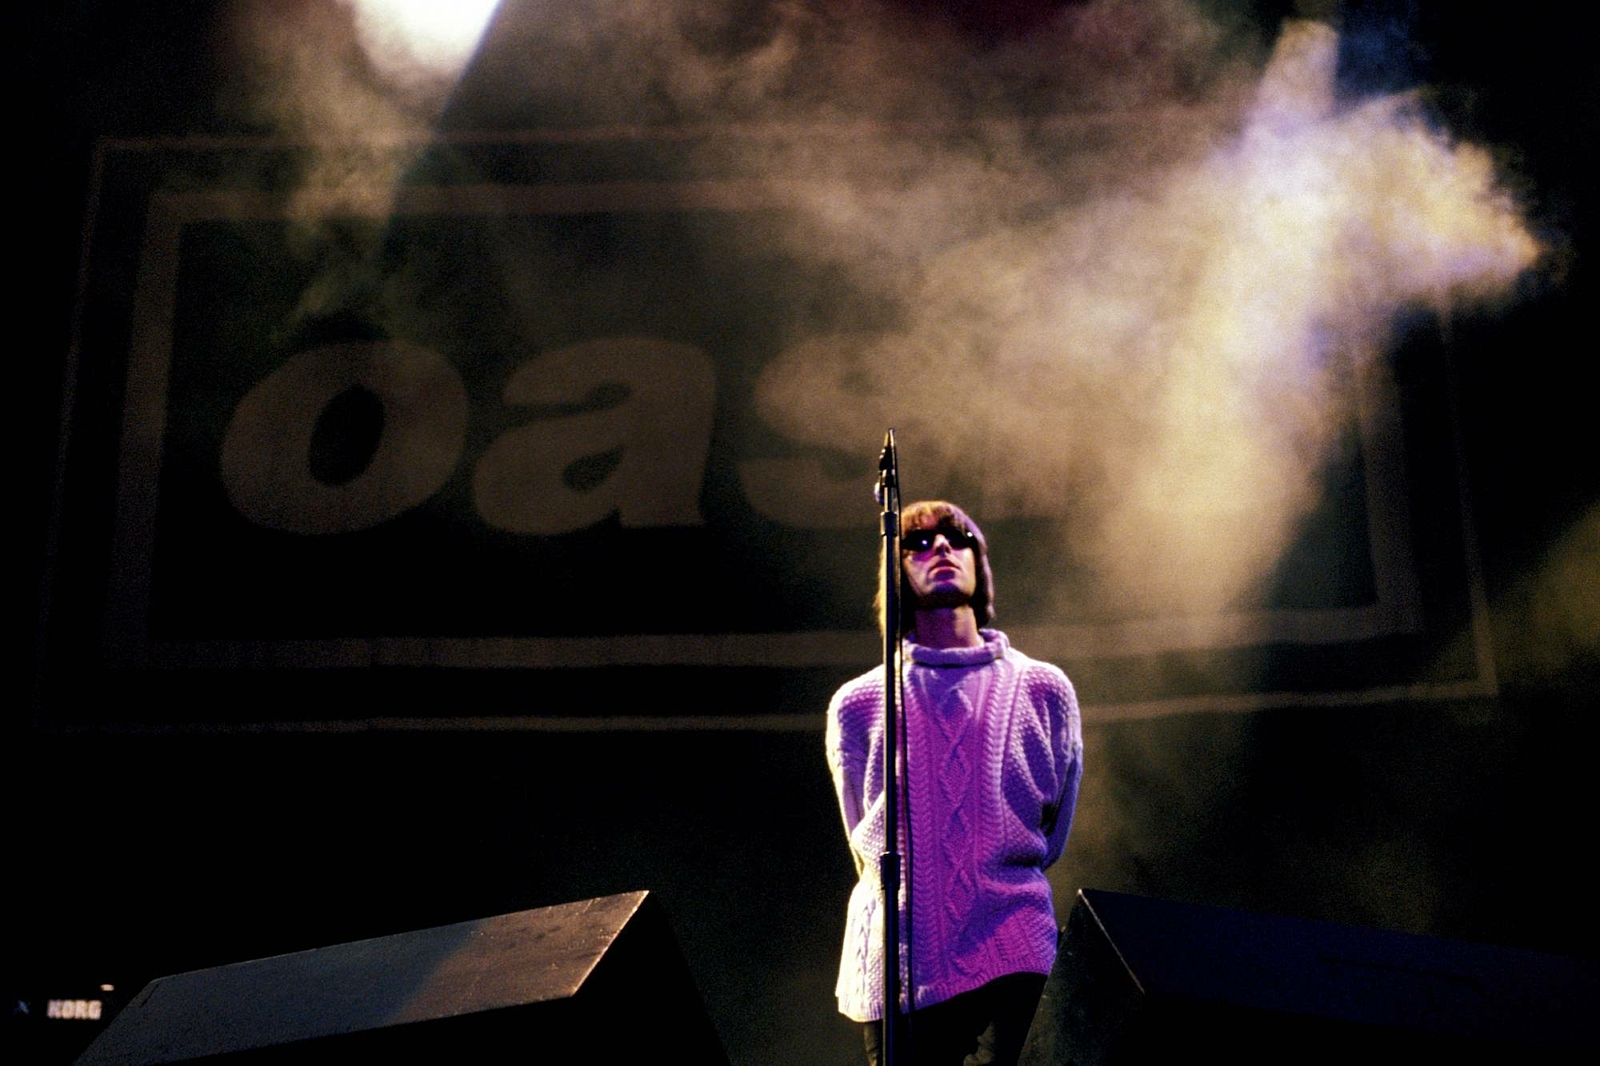 Watch a never-seen-before clip of Oasis playing 'Live Forever' at Knebworth